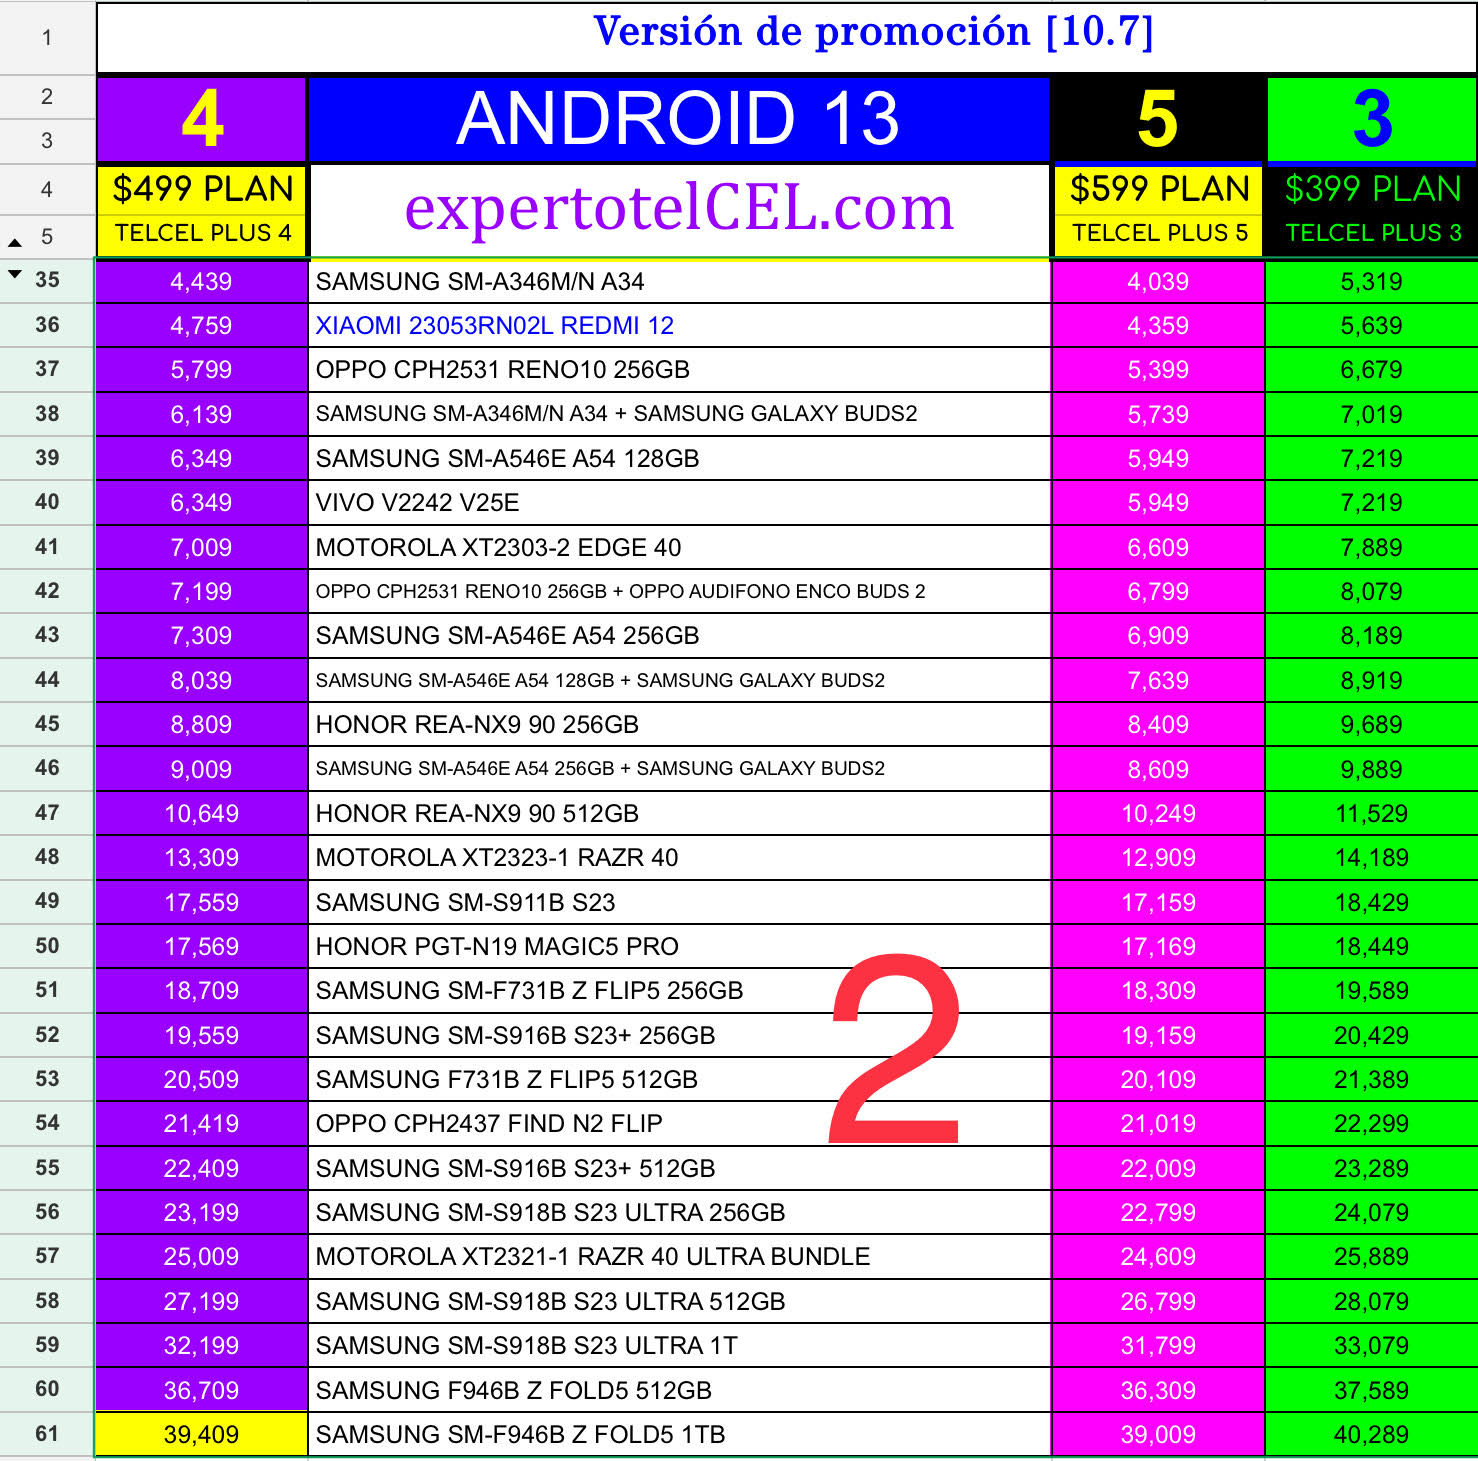 02 ANDROID 13 V10.7 23